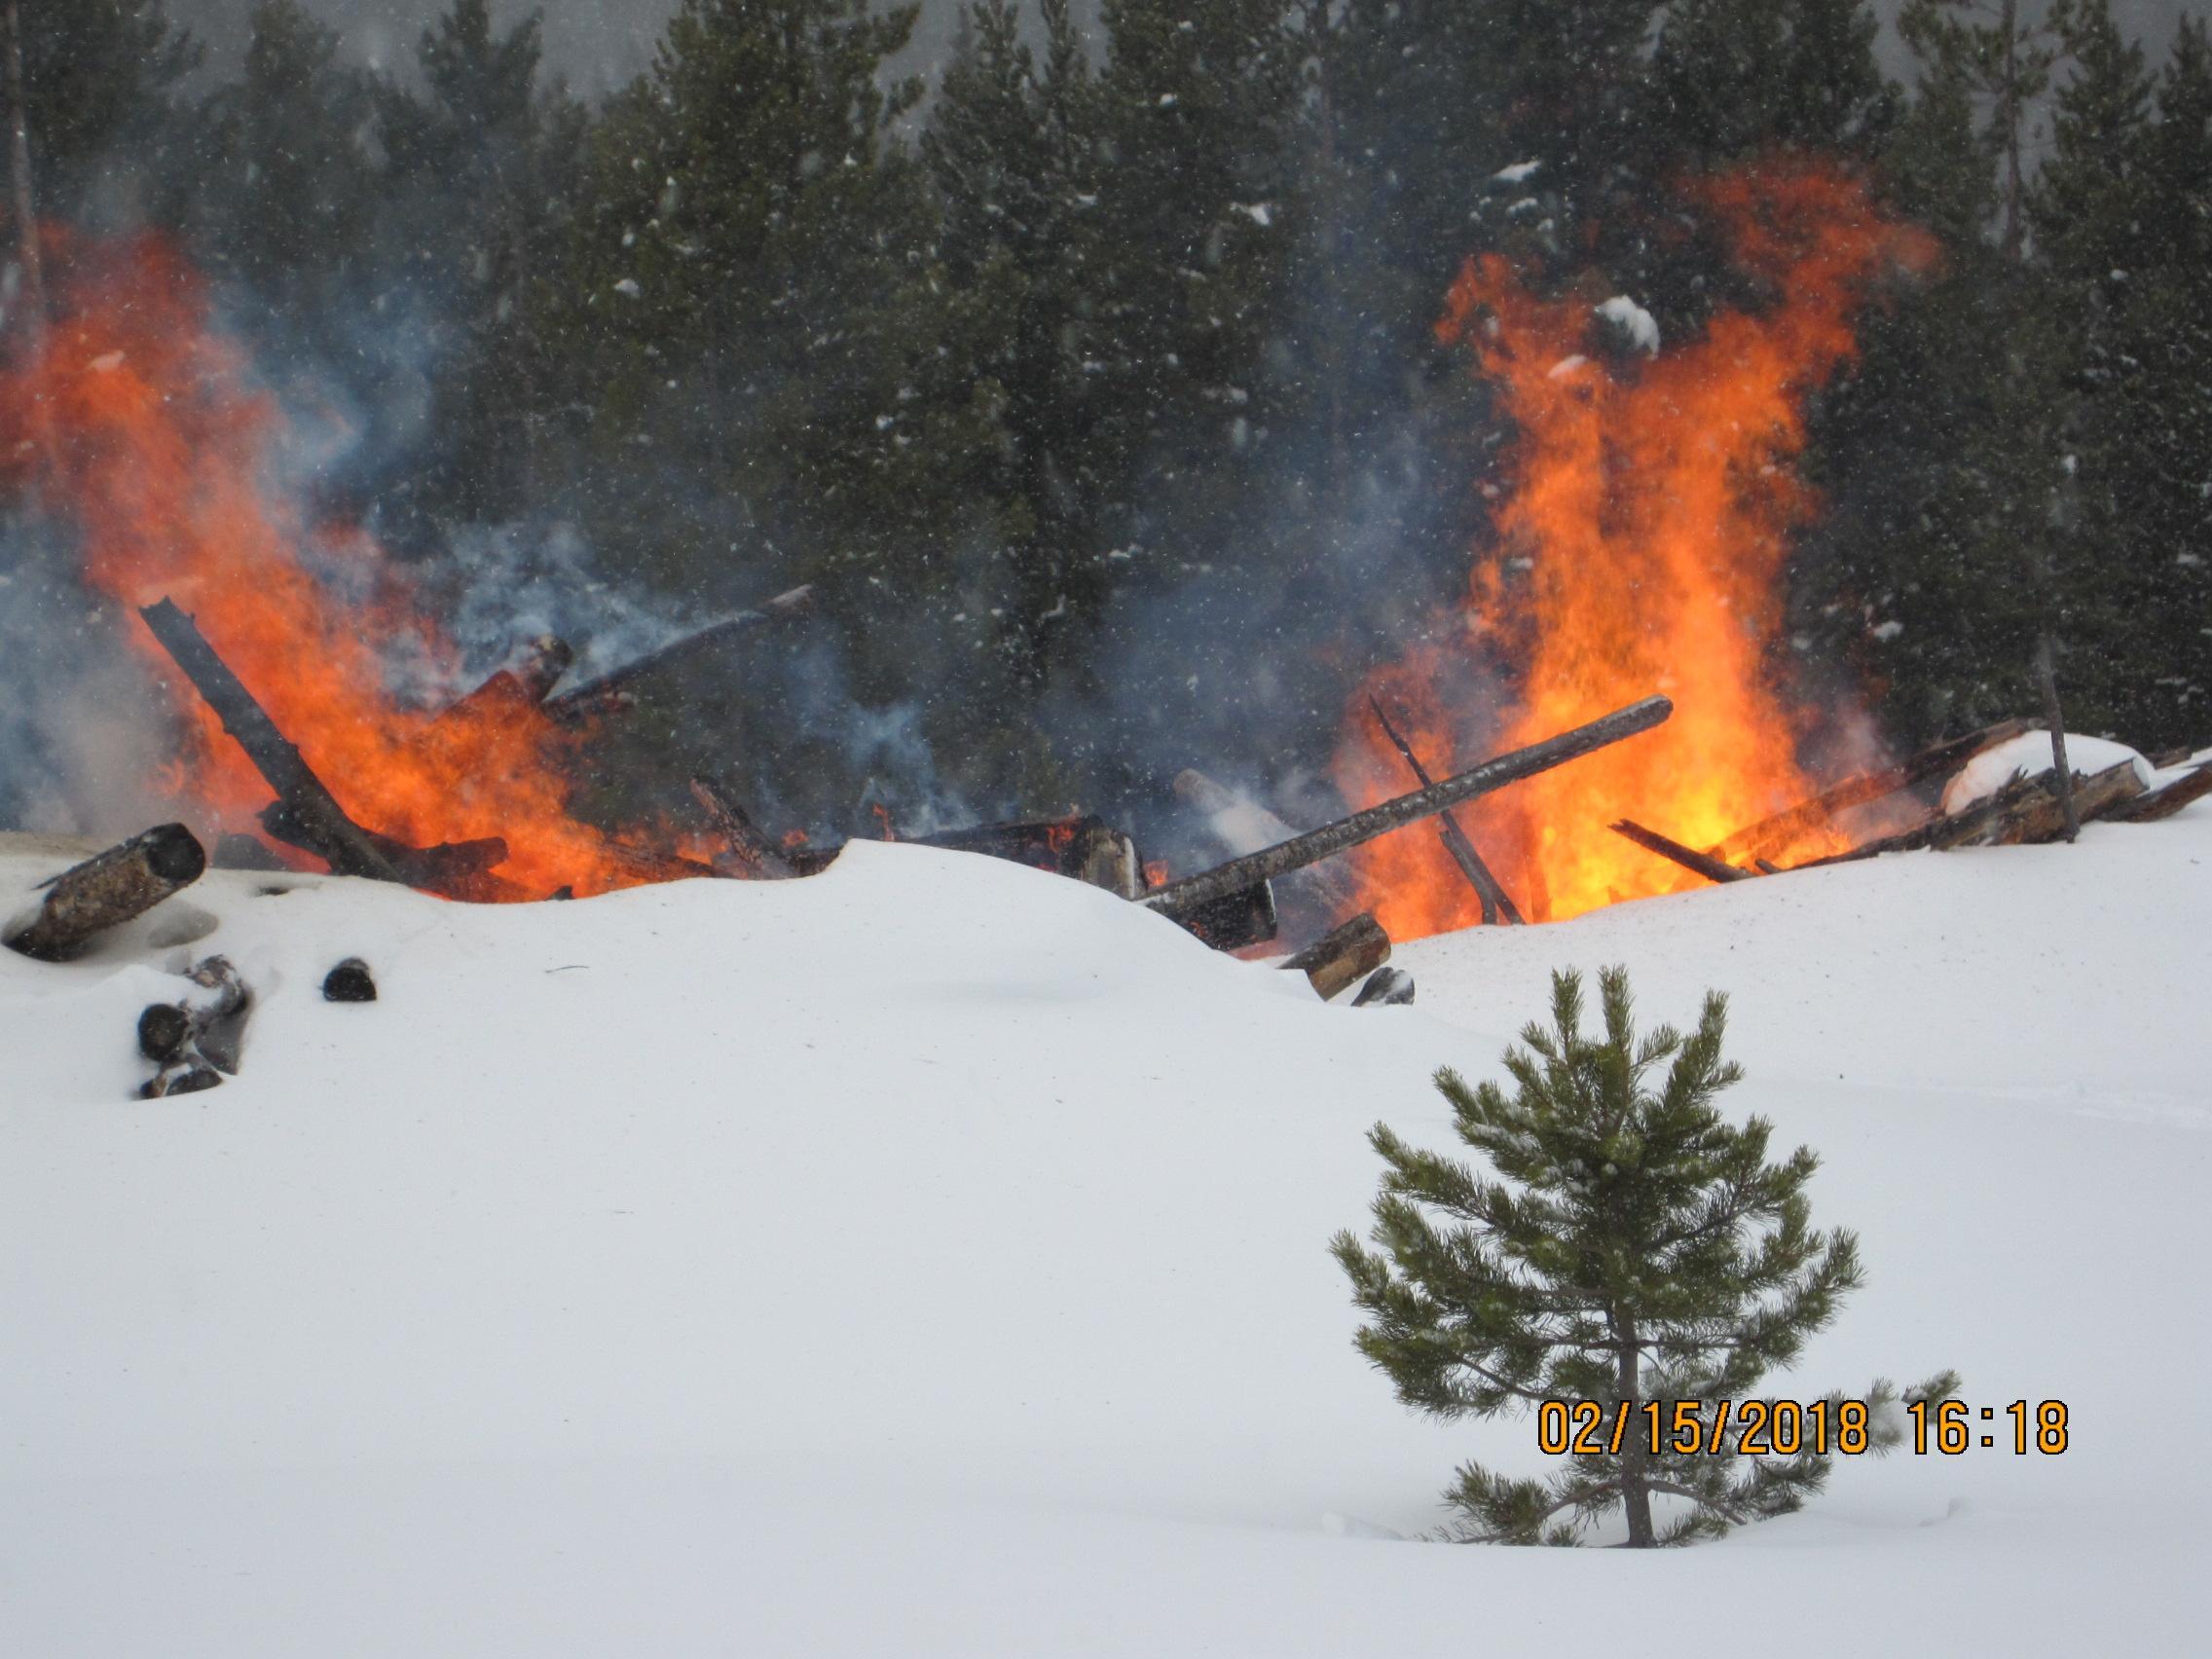 Pile burning in snow with smoke, flames